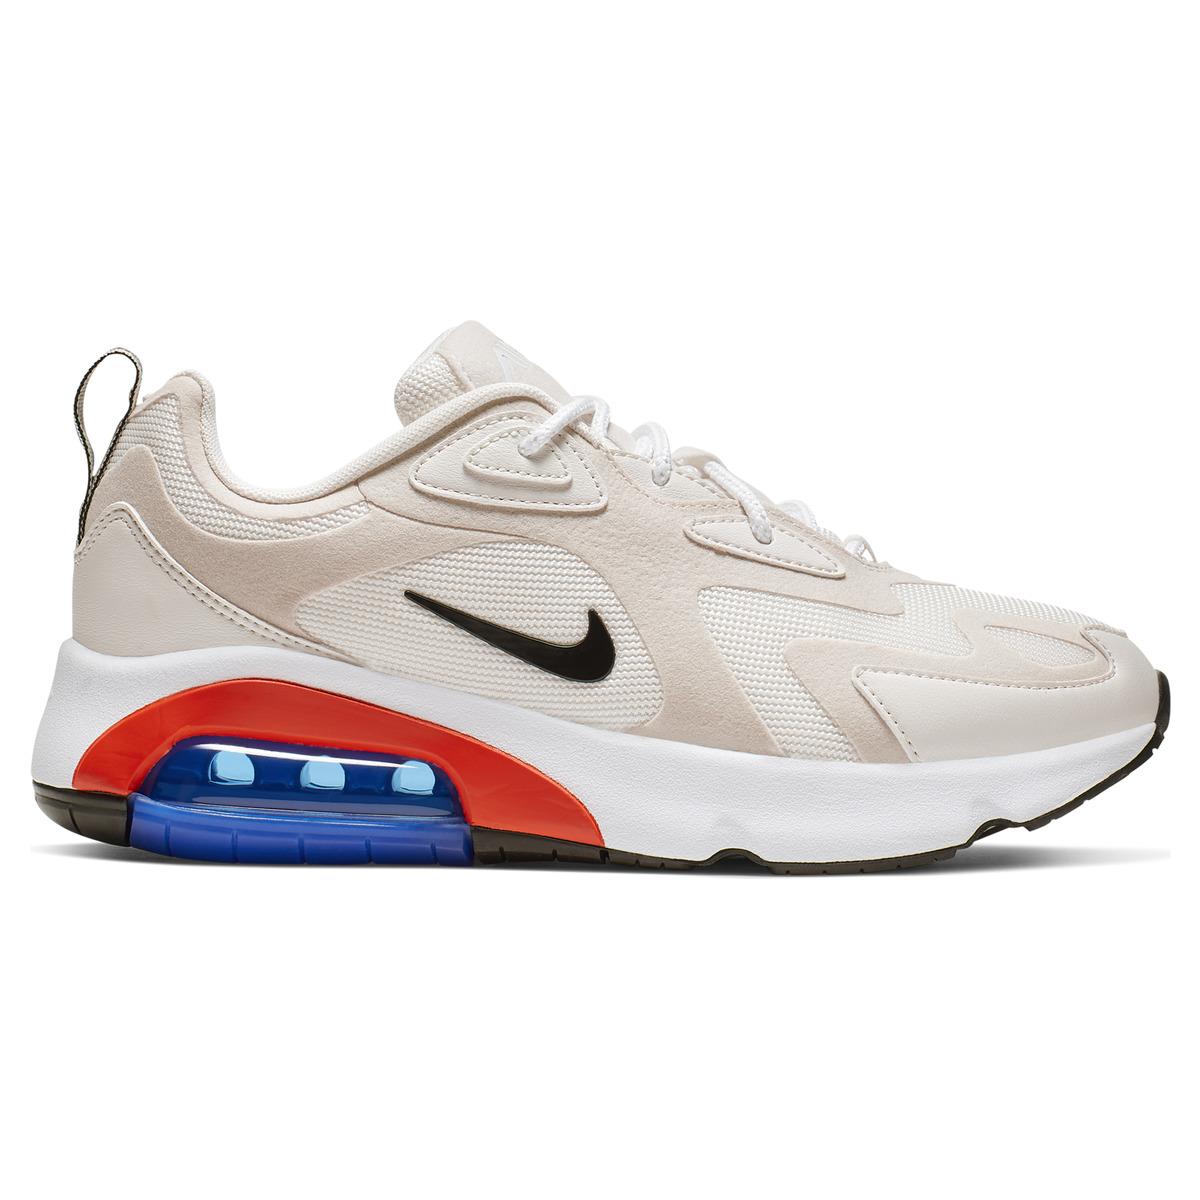 Nike Rubber Air Max 200 Casual Trainers in White - Lyst